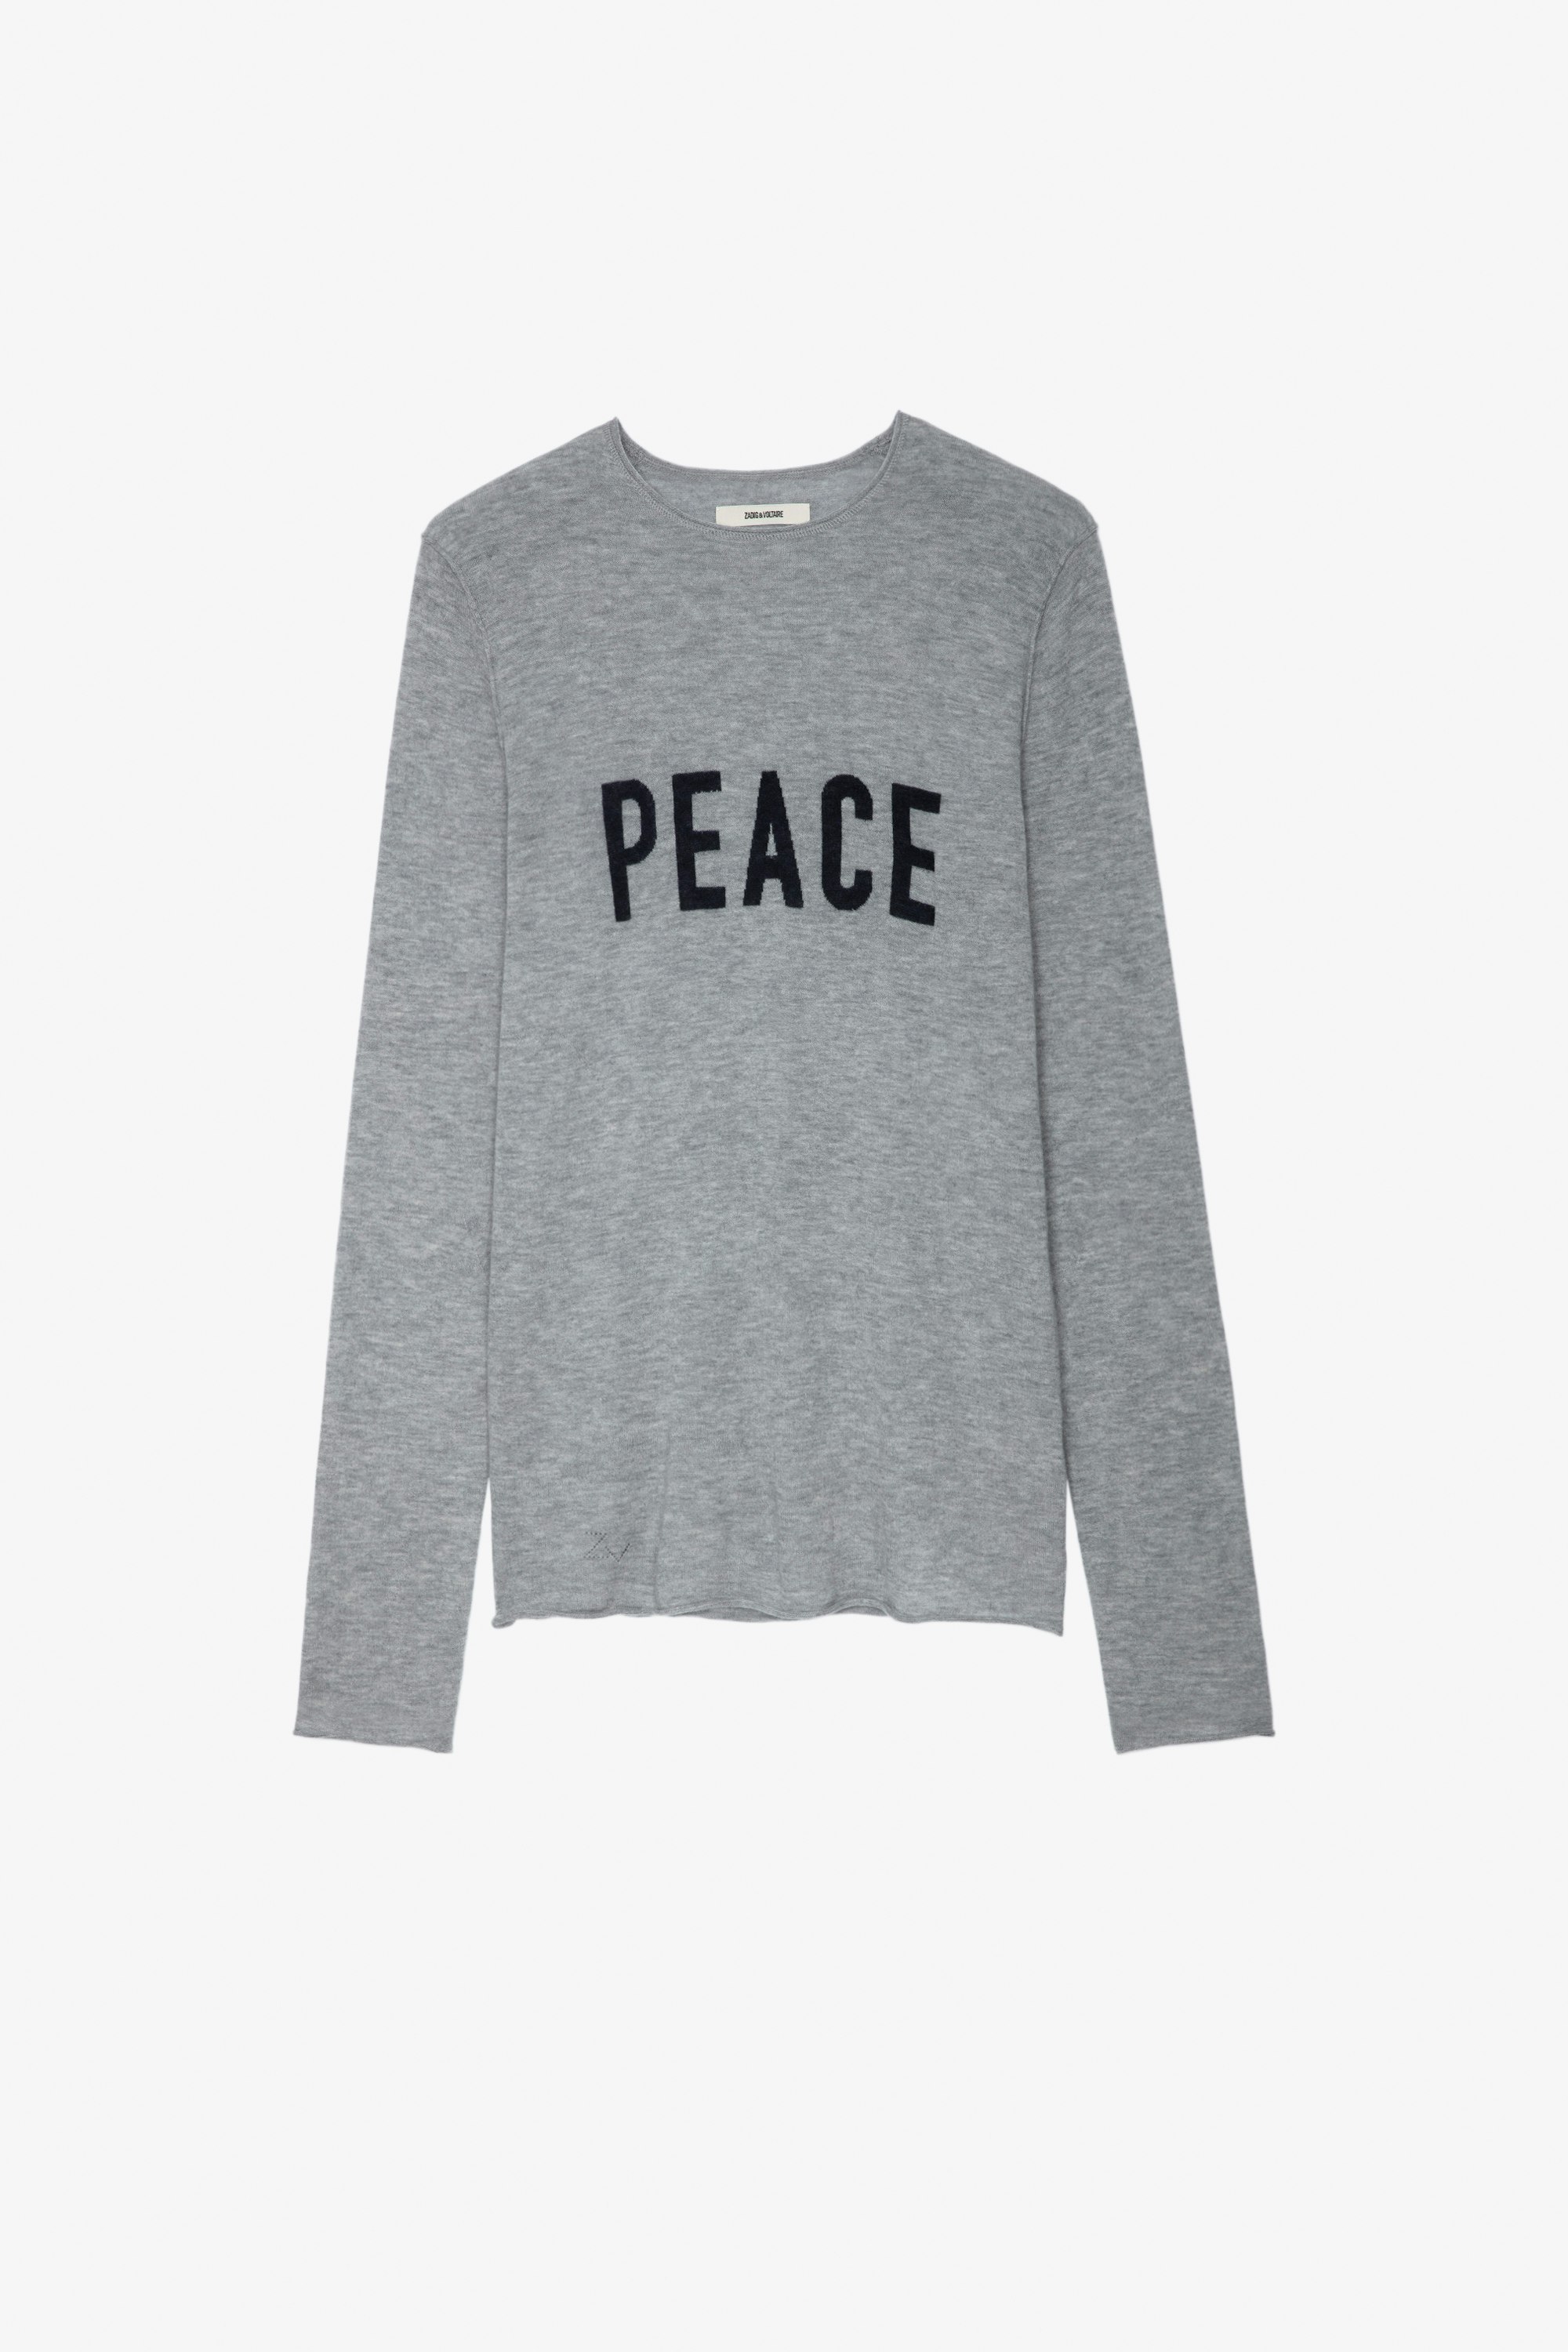 Teiss Pullover Men's grey marl cashmere pullover with round neckline, long sleeves and "Peace" slogan